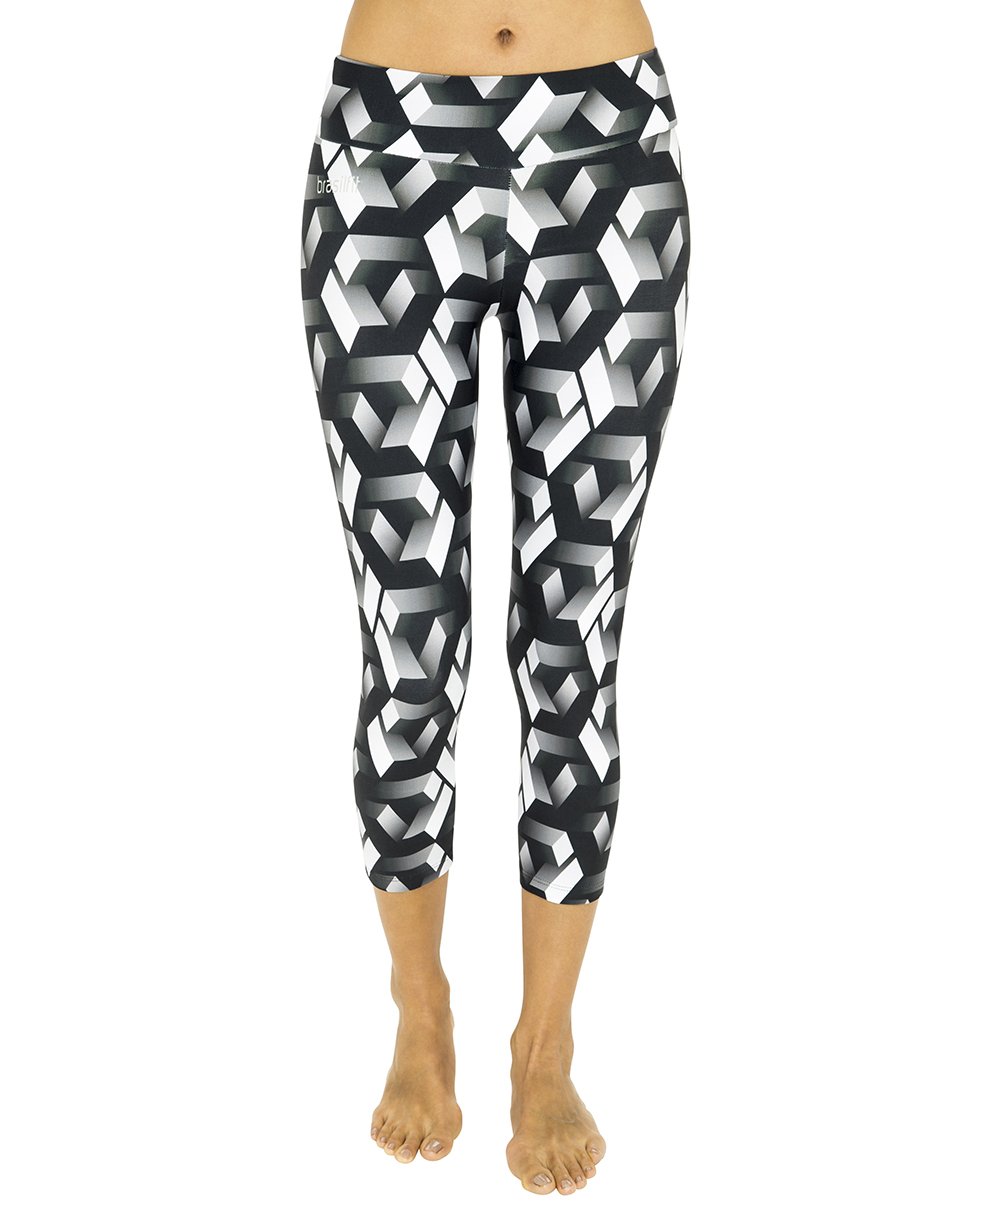 Side view product image for Brasilfit Labyrinth calf length activewear leggings.  Labyrinth leggings are part of our premium printed activewear collection that is focused on performance, high compression activewear with colourful prints.